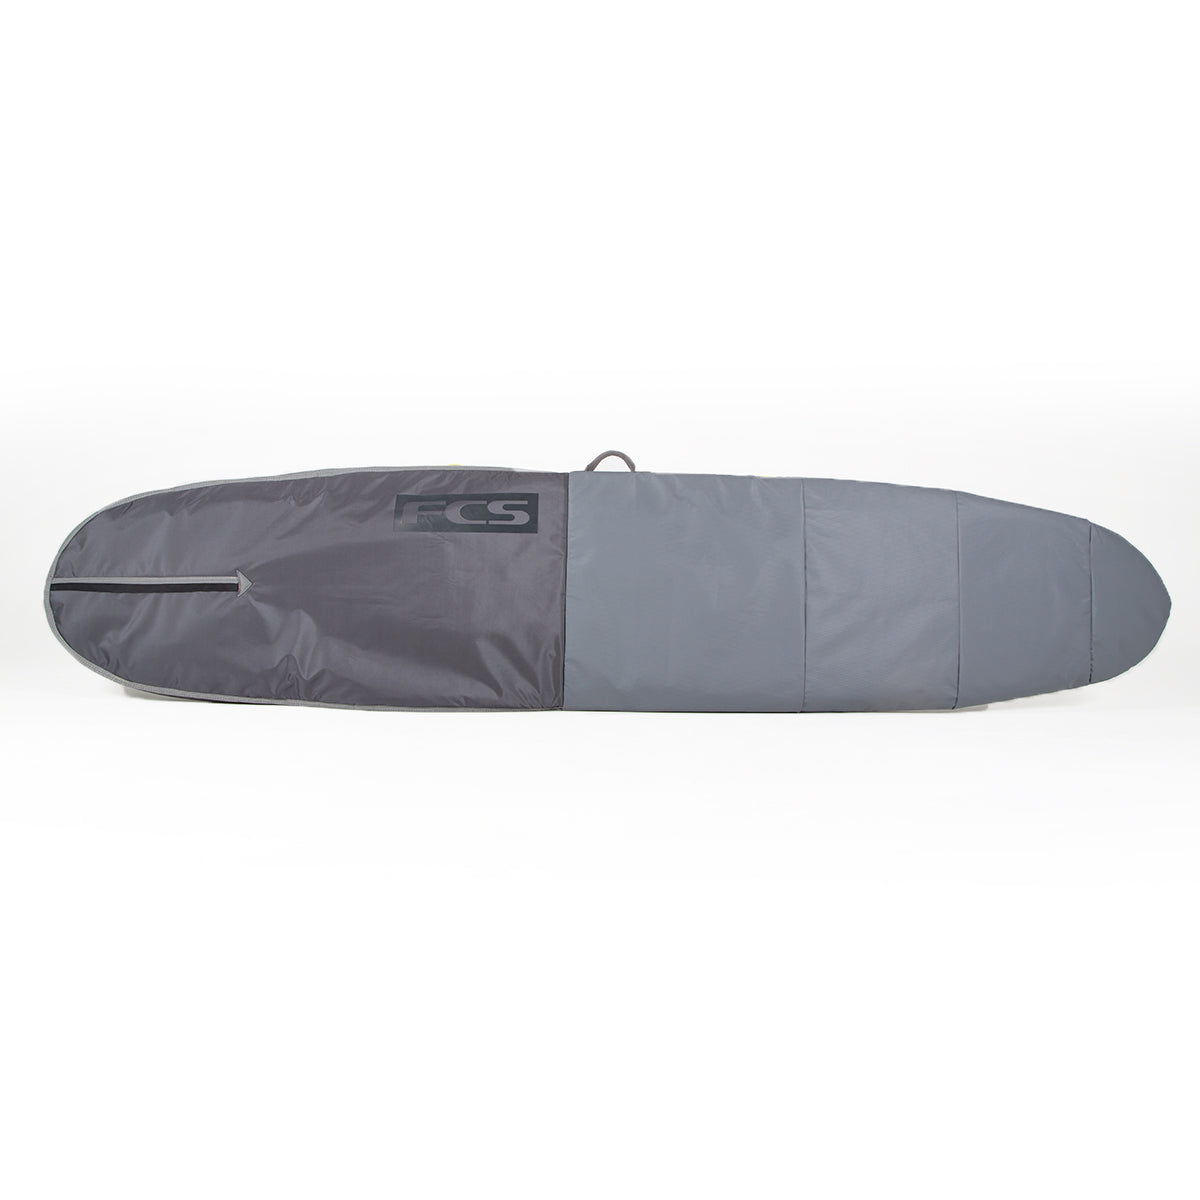 Day Longboard Cover FCS